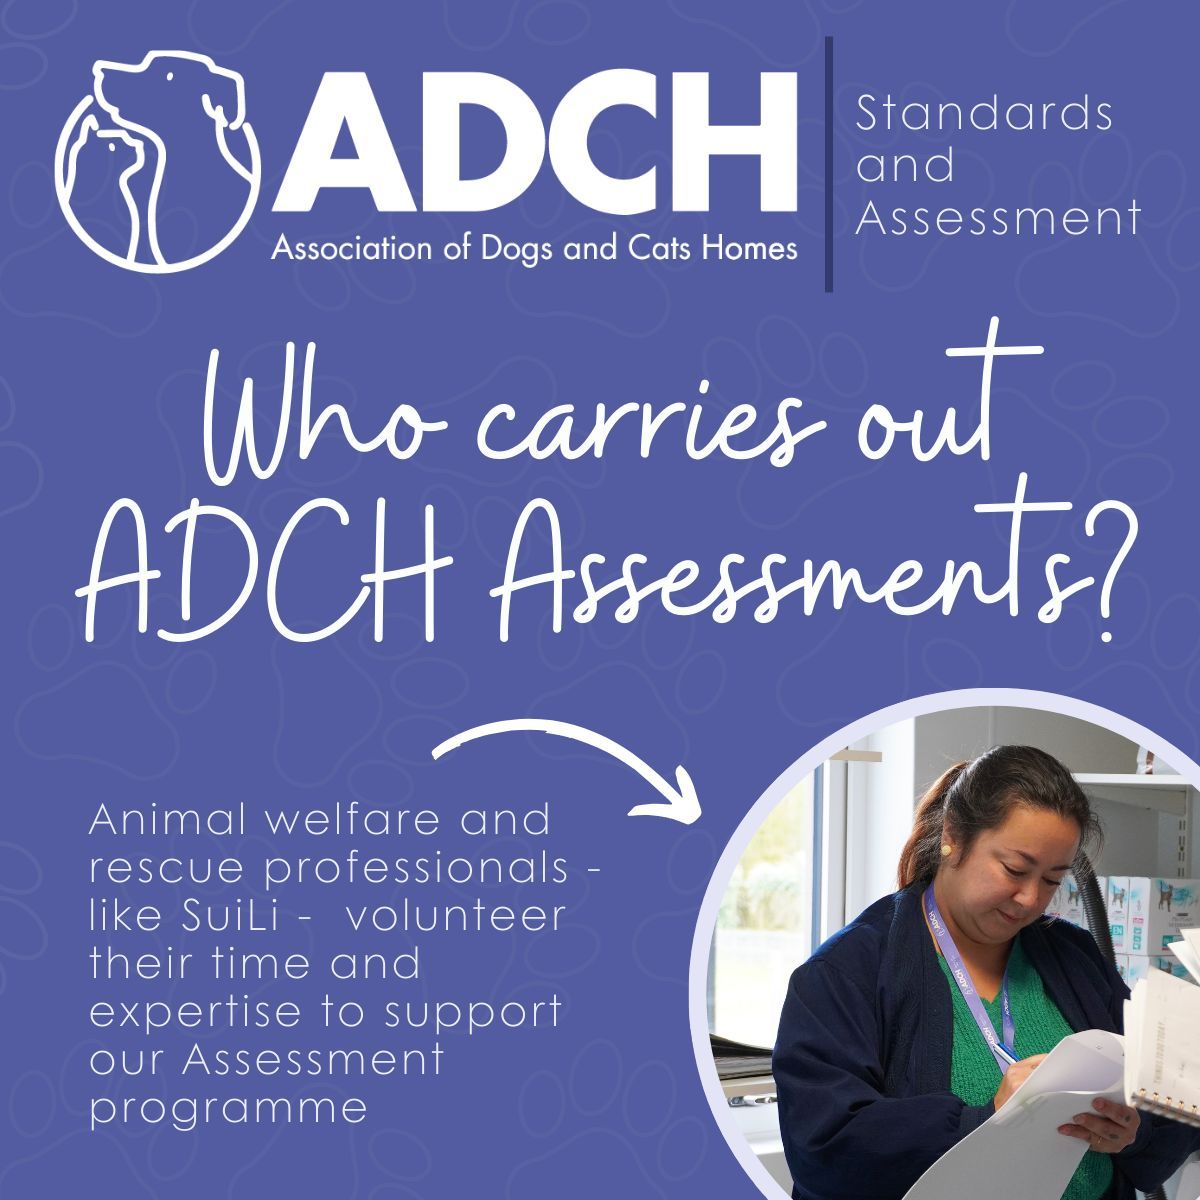 💭Did you know that the ADCH Assessment programme is carried out exclusively by volunteers? Our Volunteer Assessors support to our Members to achieve and maintain ADCH's Minimum Welfare and Operational Standards. Thank you to our Volunteer Assessors 🐕🐈🤝#togetherforcatsanddogs